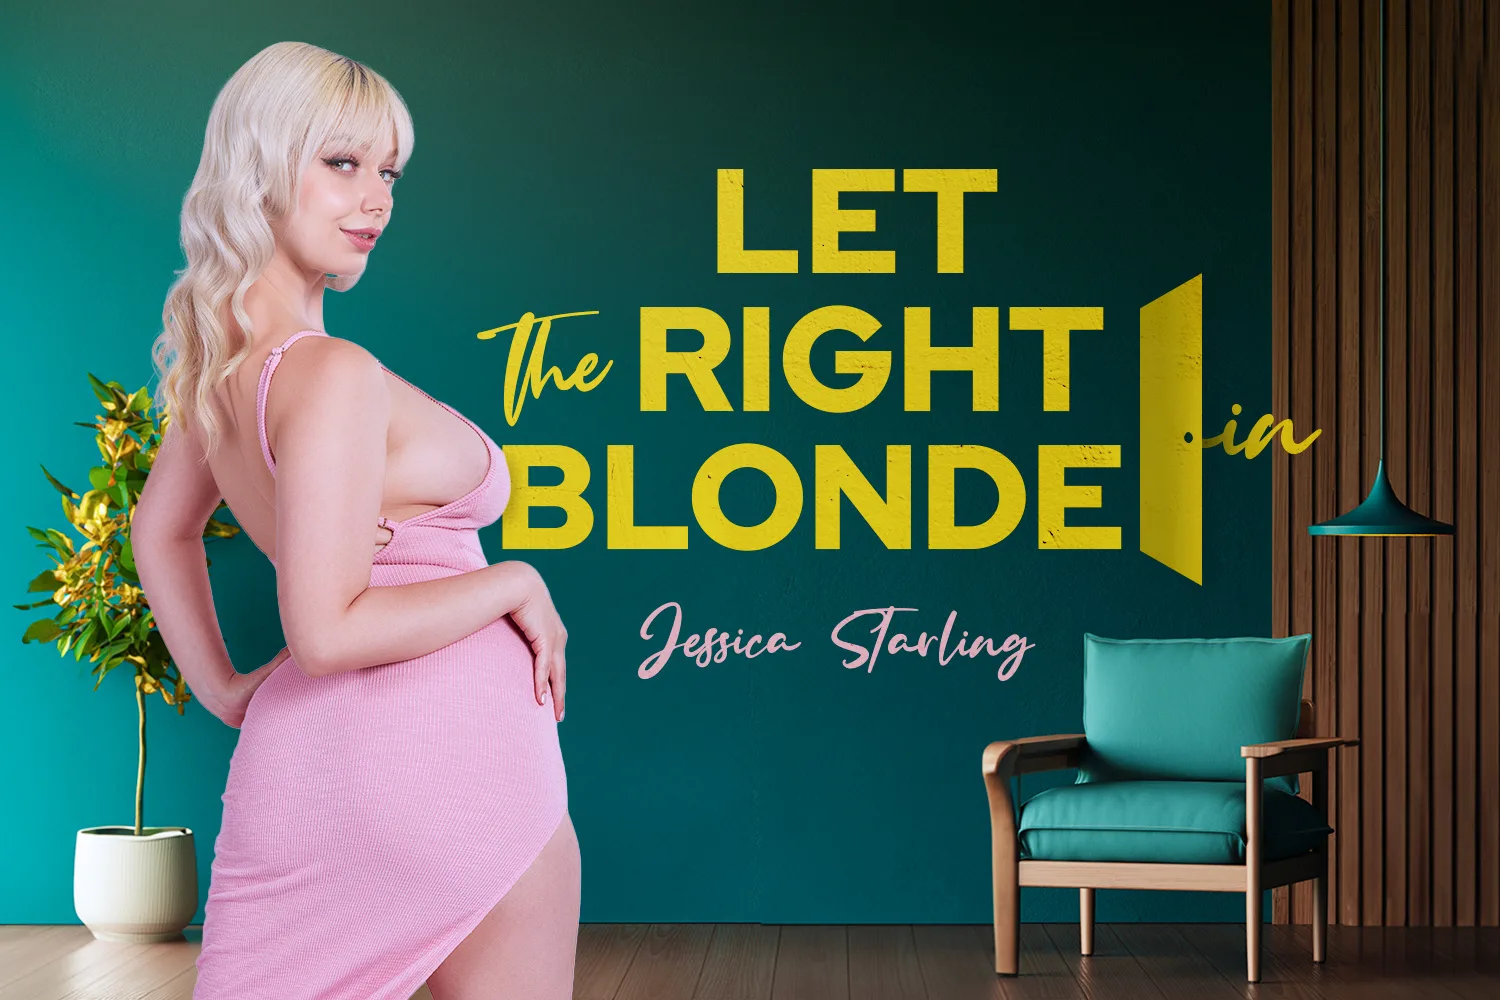 [2023-10-17] Let the Right Blonde In - BaDoinkVR